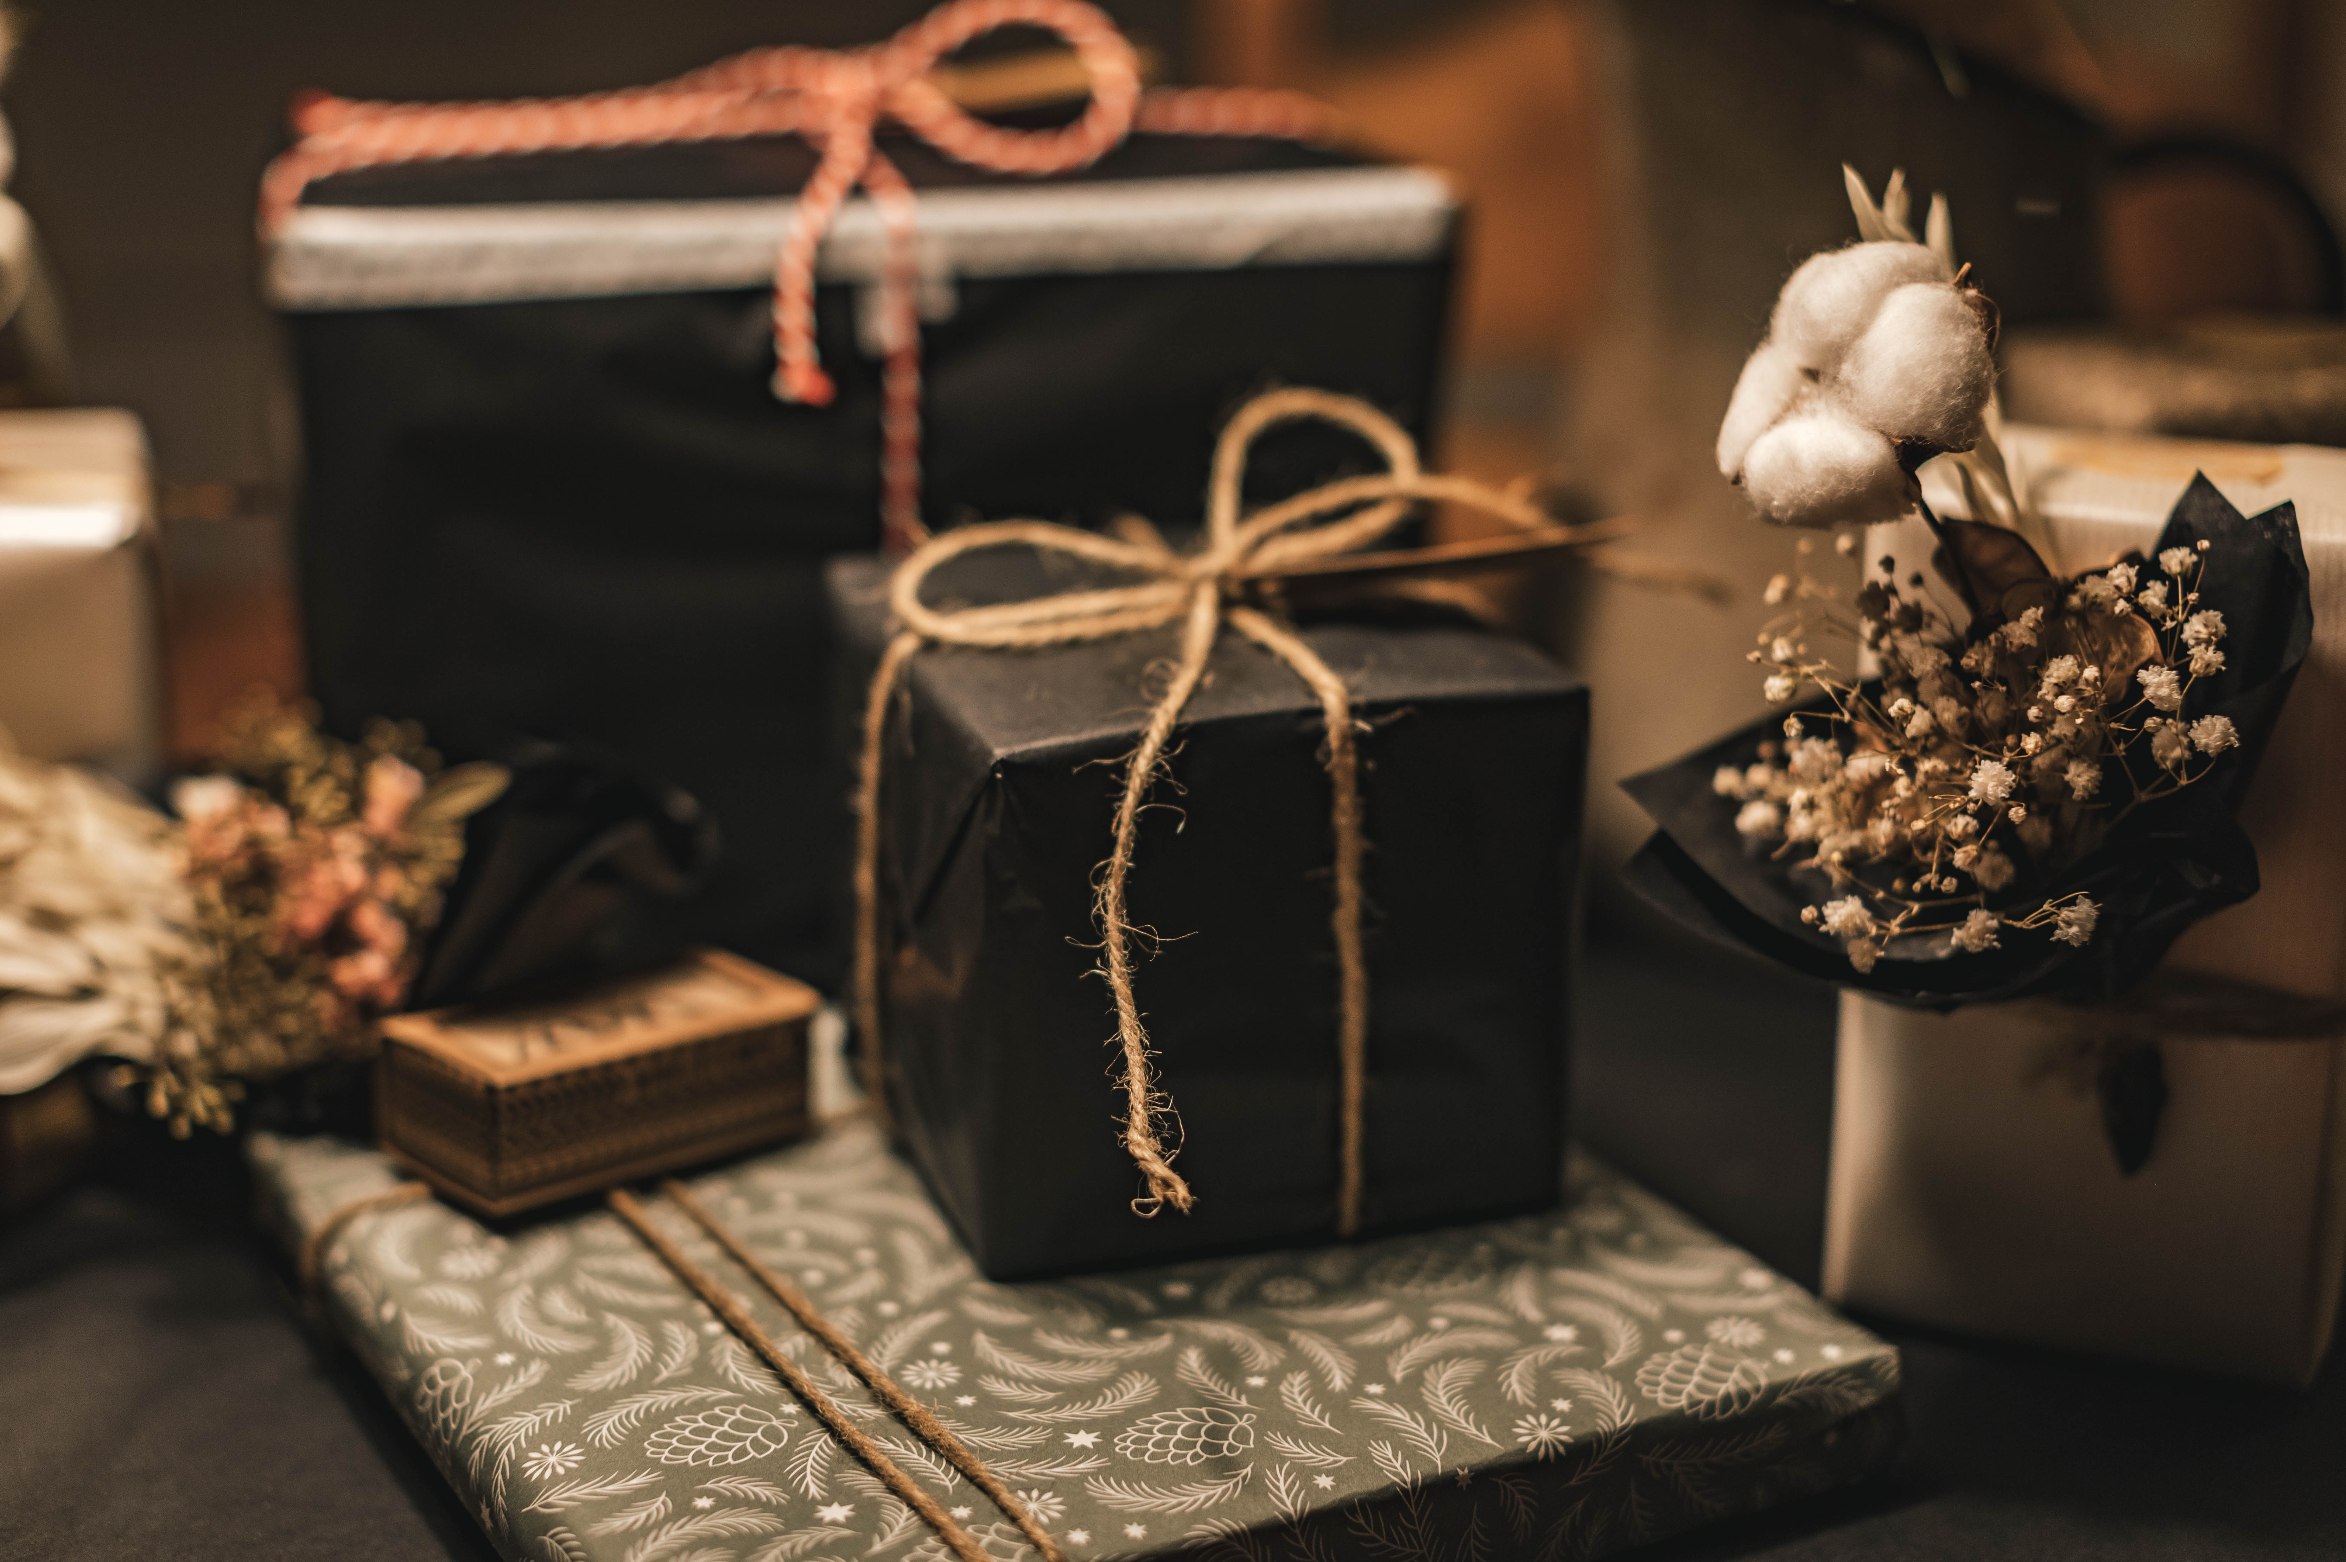 When it comes to simple gifting, the possibilities are endless.